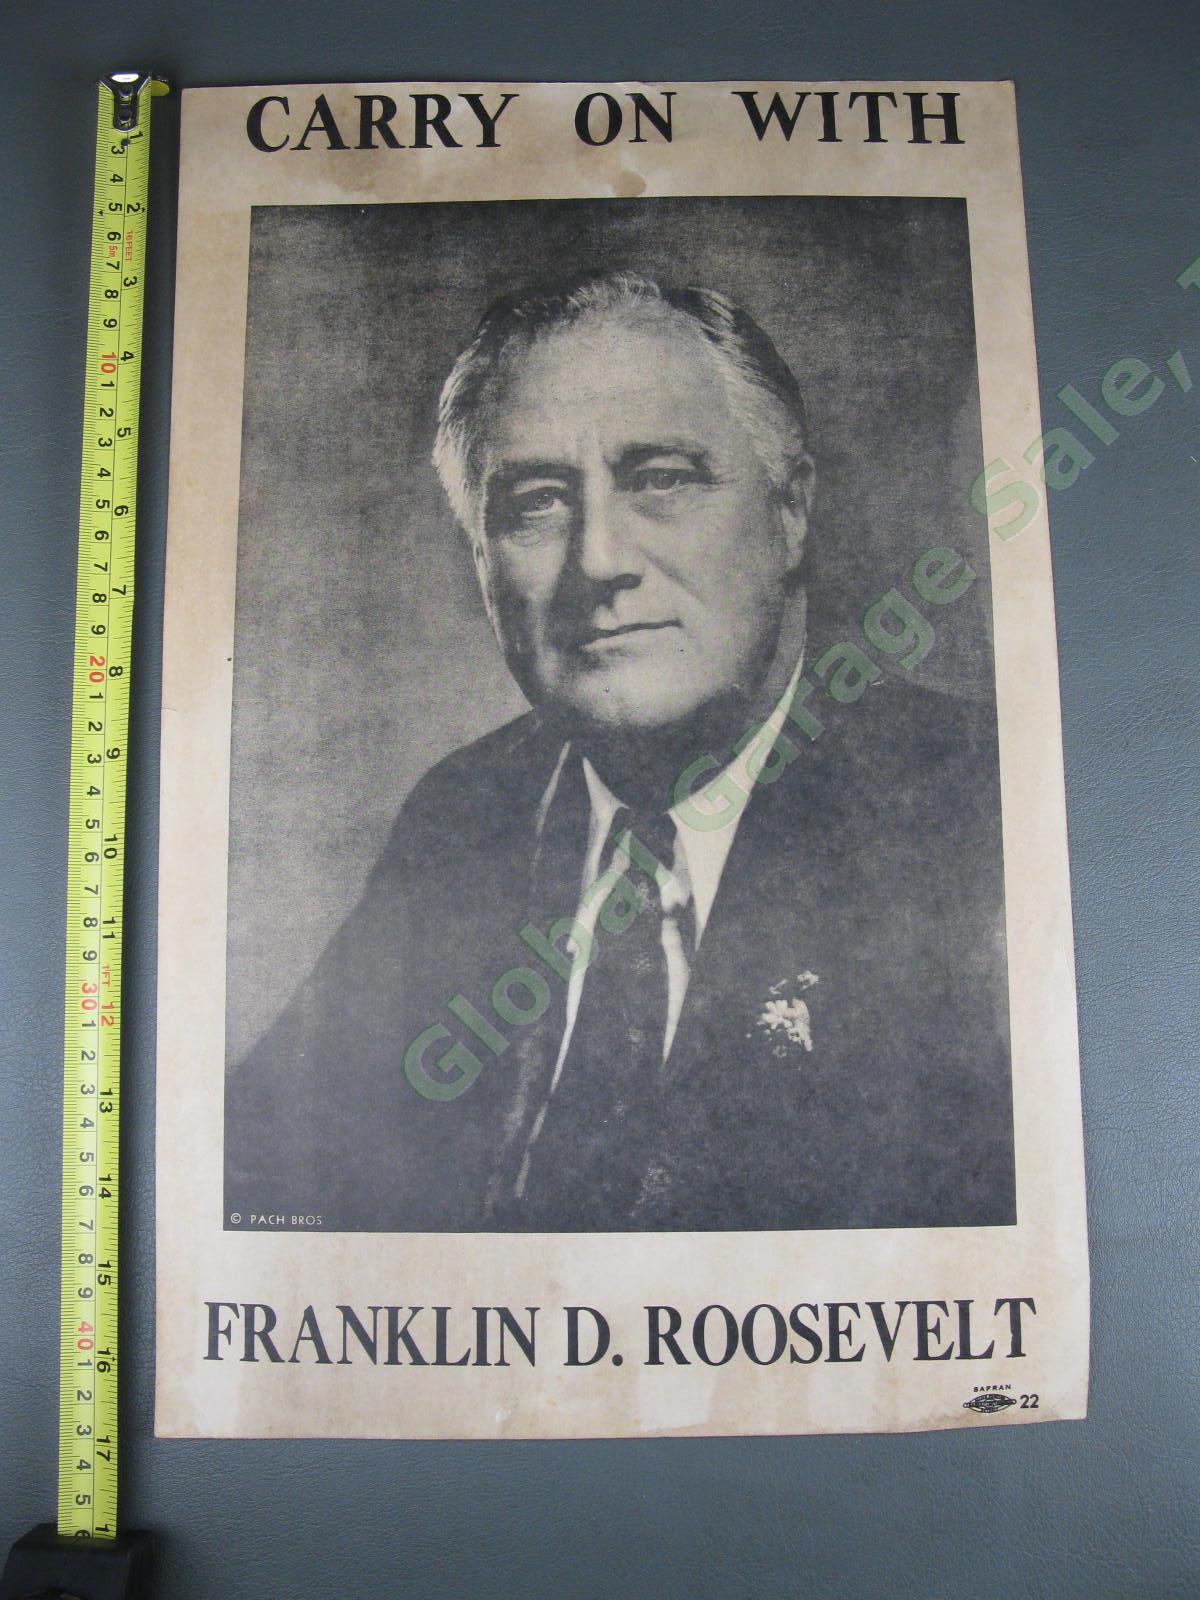 ORIGINAL 1936 President Campaign Poster CARRY ON WITH Franklin D Roosevelt FDR 5